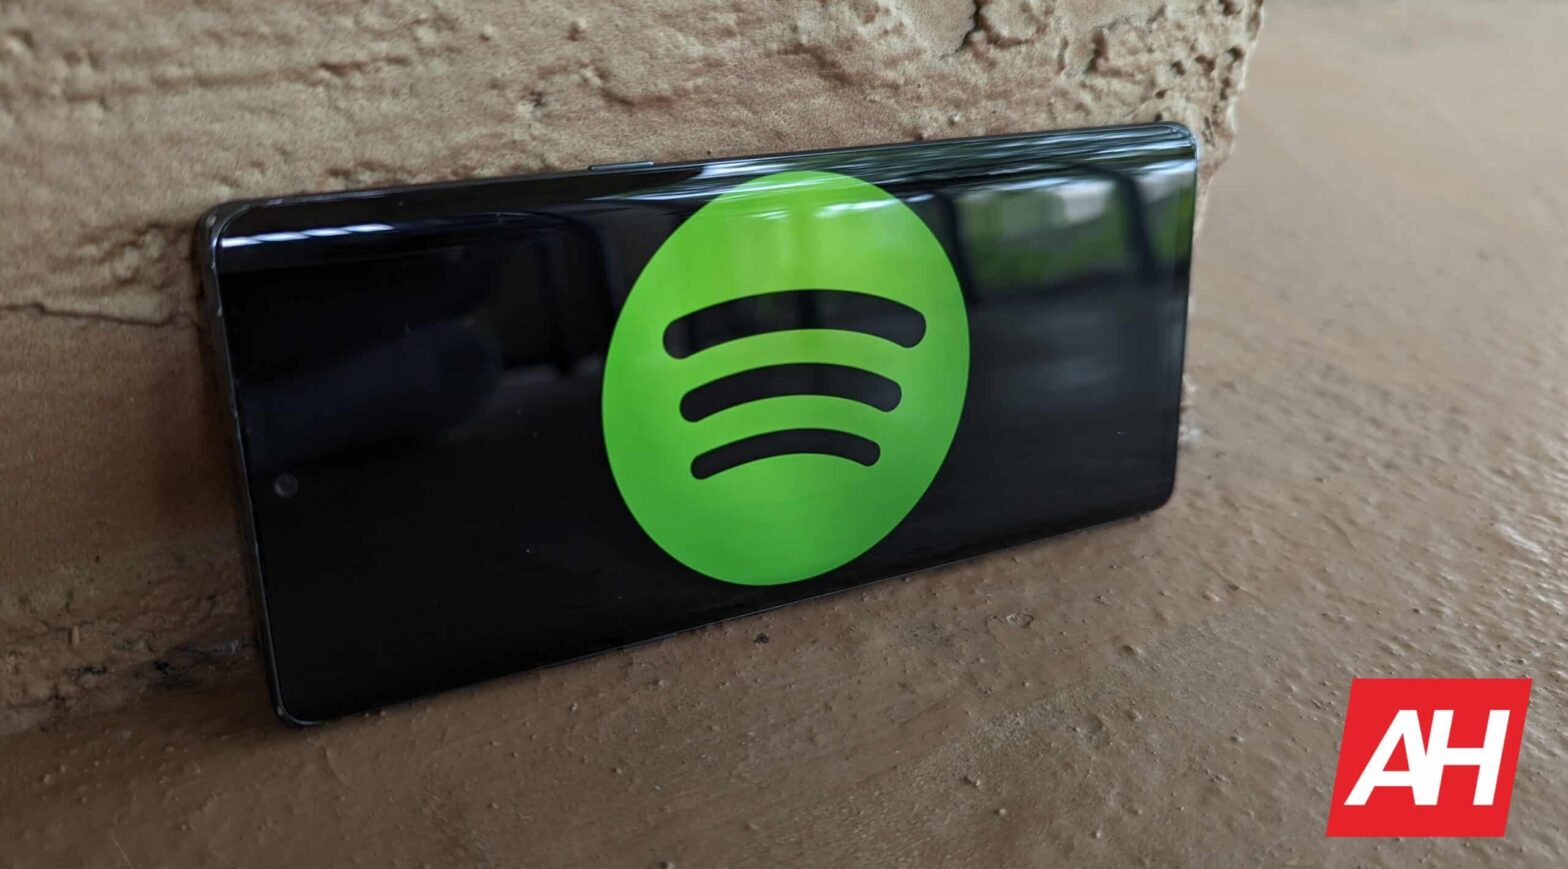 Spotify's DJ is now available in more countries, but there's a catch